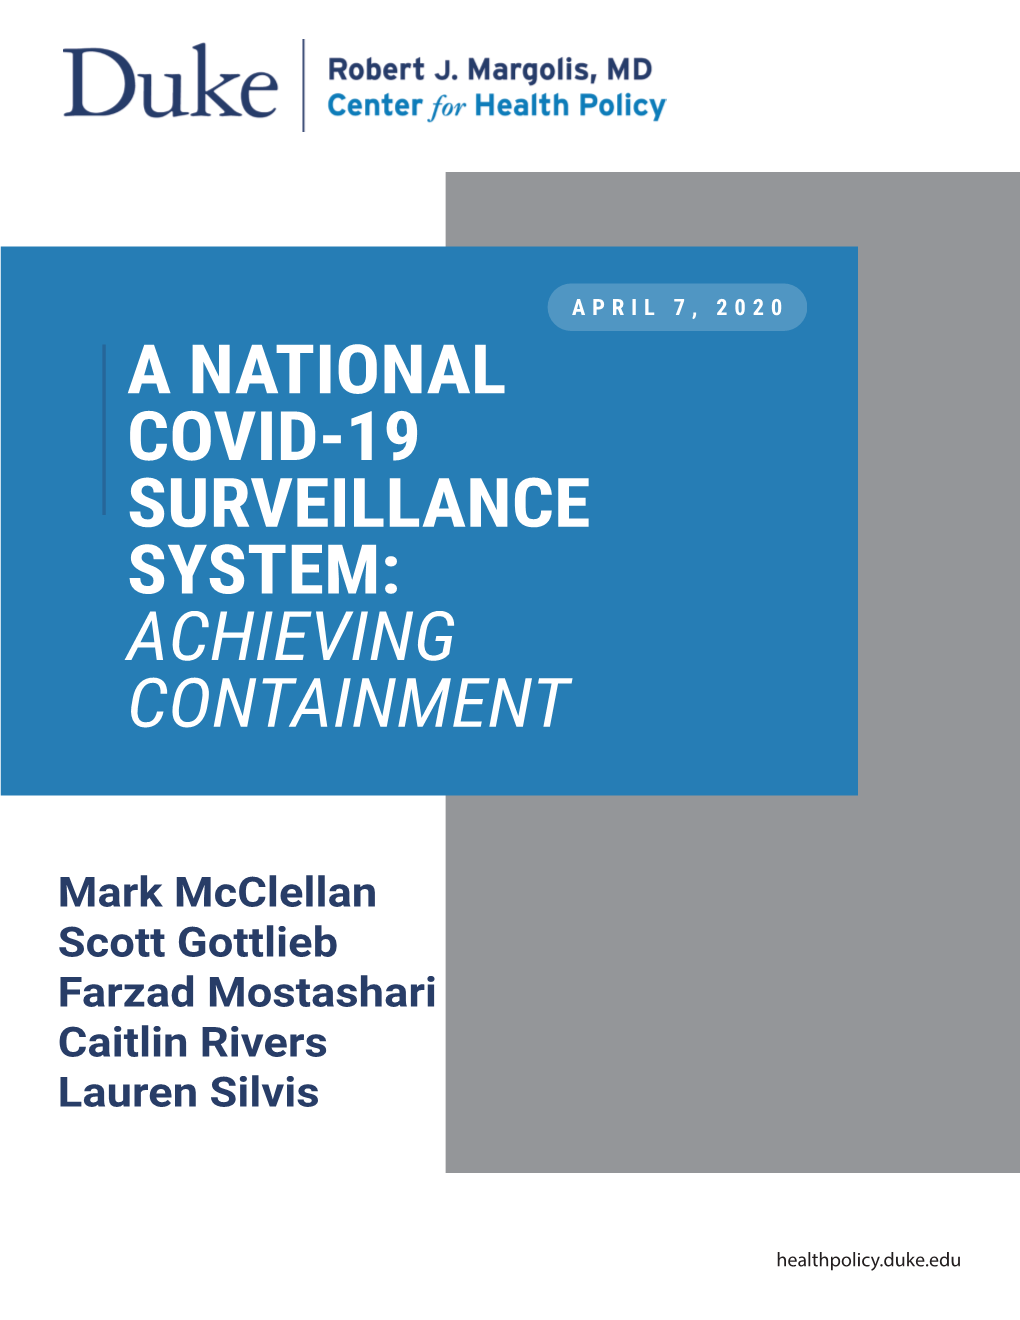 A National Covid-19 Surveillance System: Achieving Containment